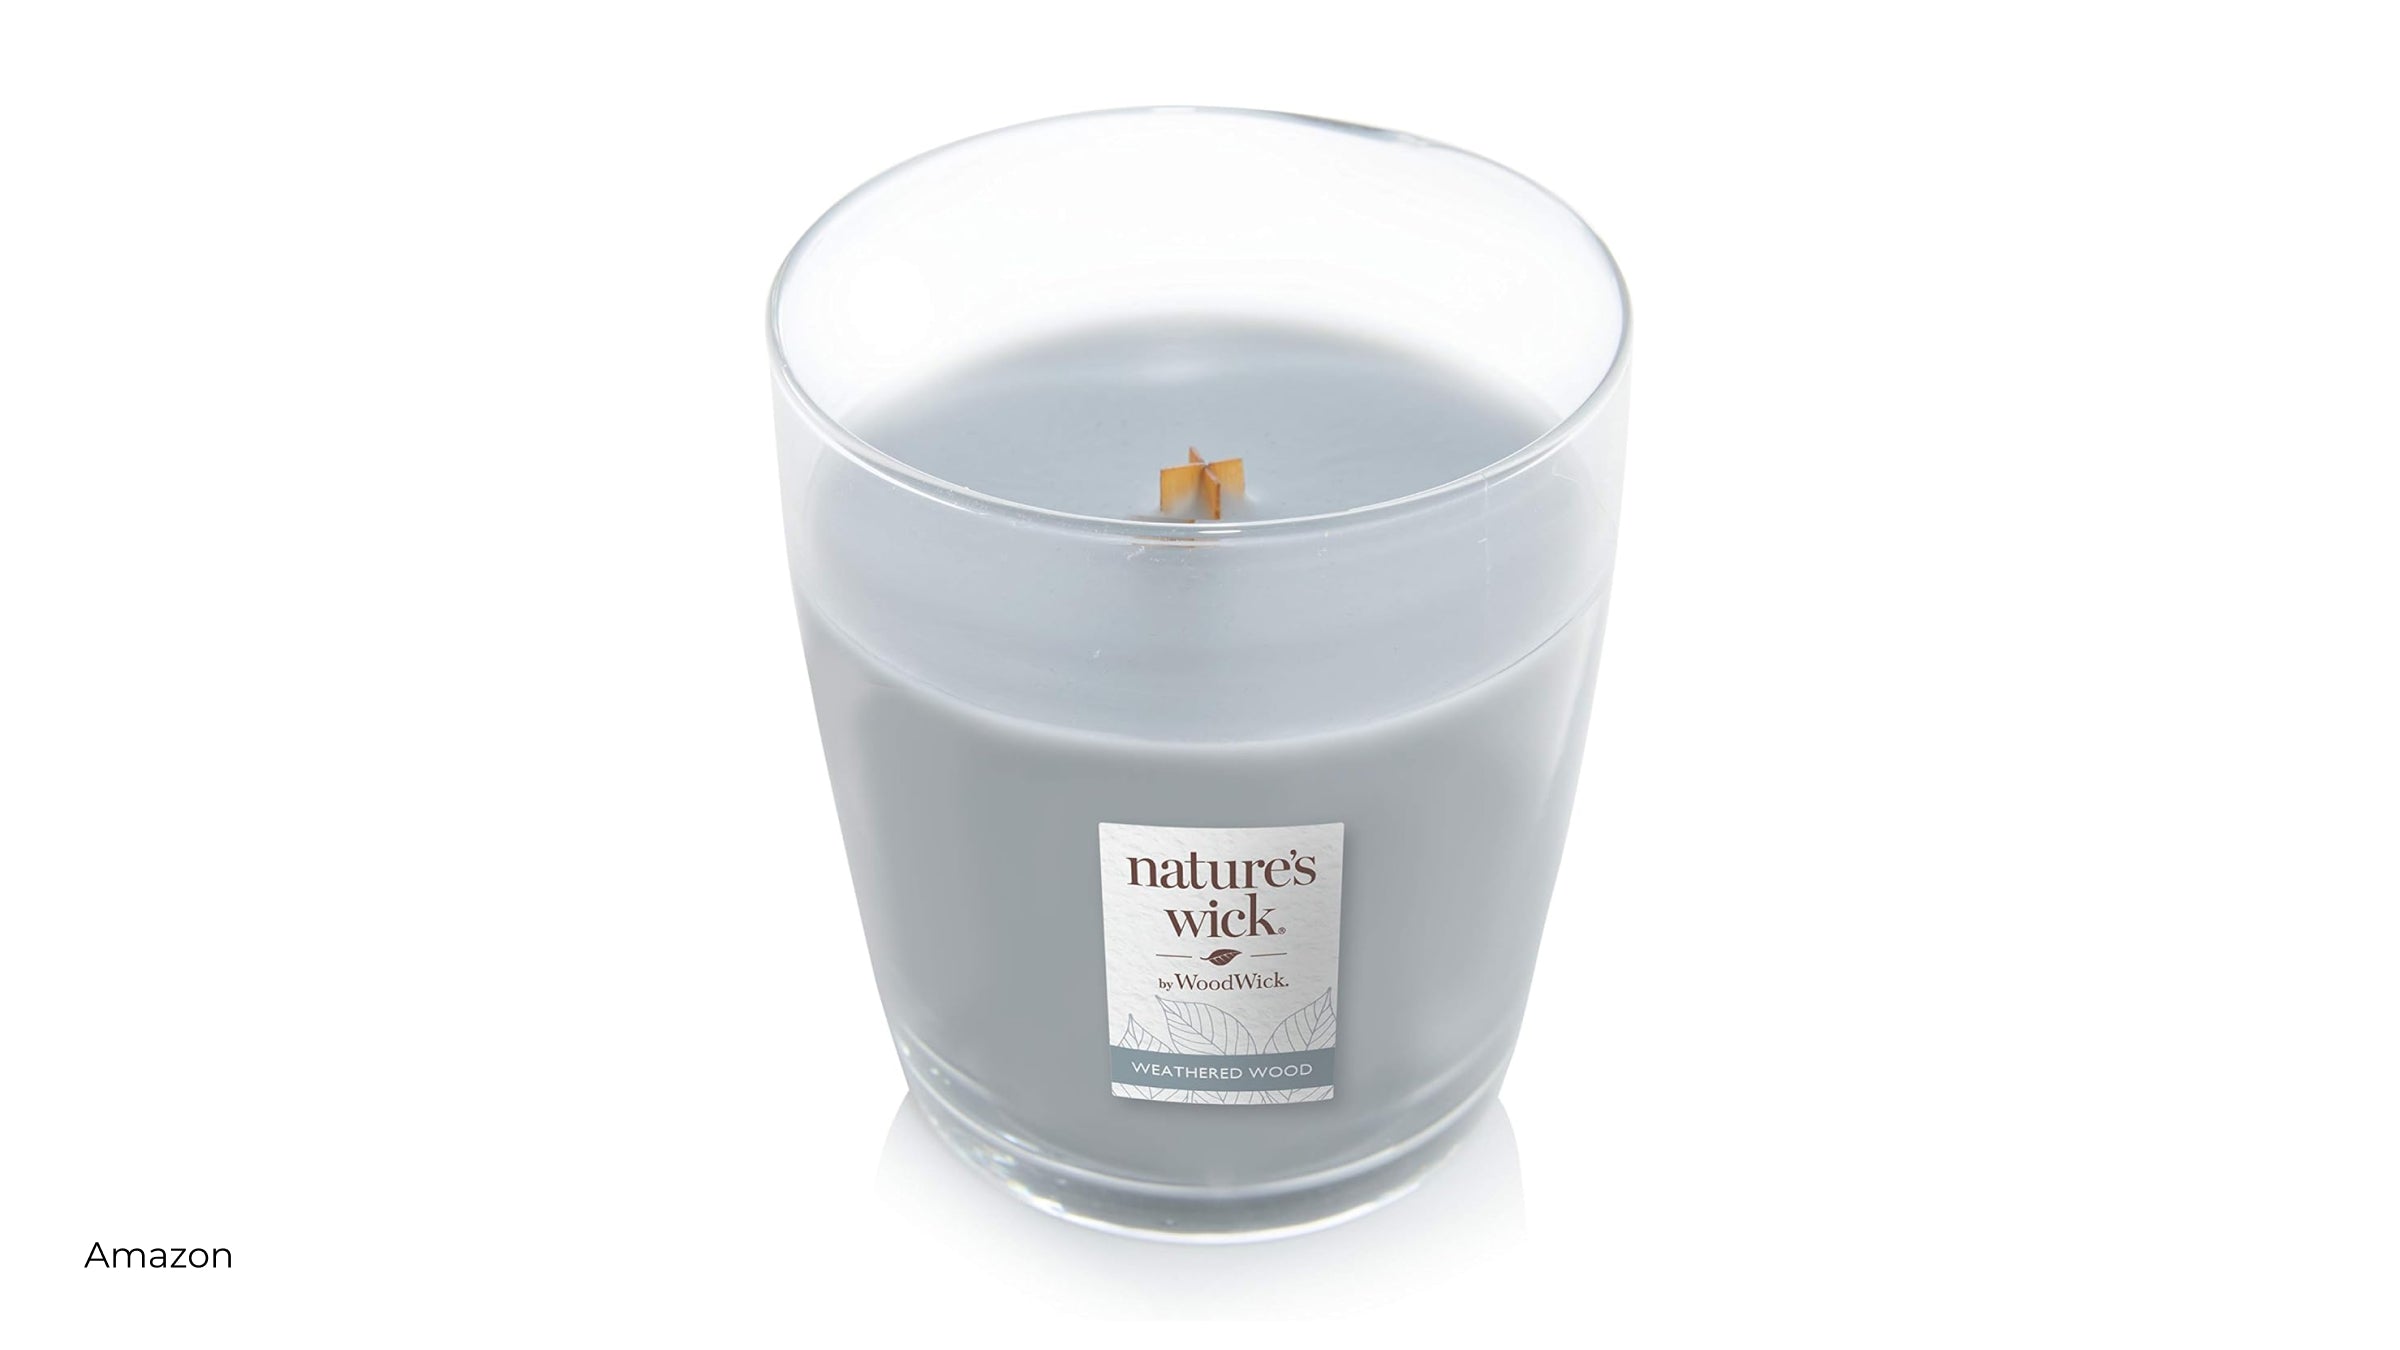 Gray candle in glass jar natures wick weathered wood candle on Amazon